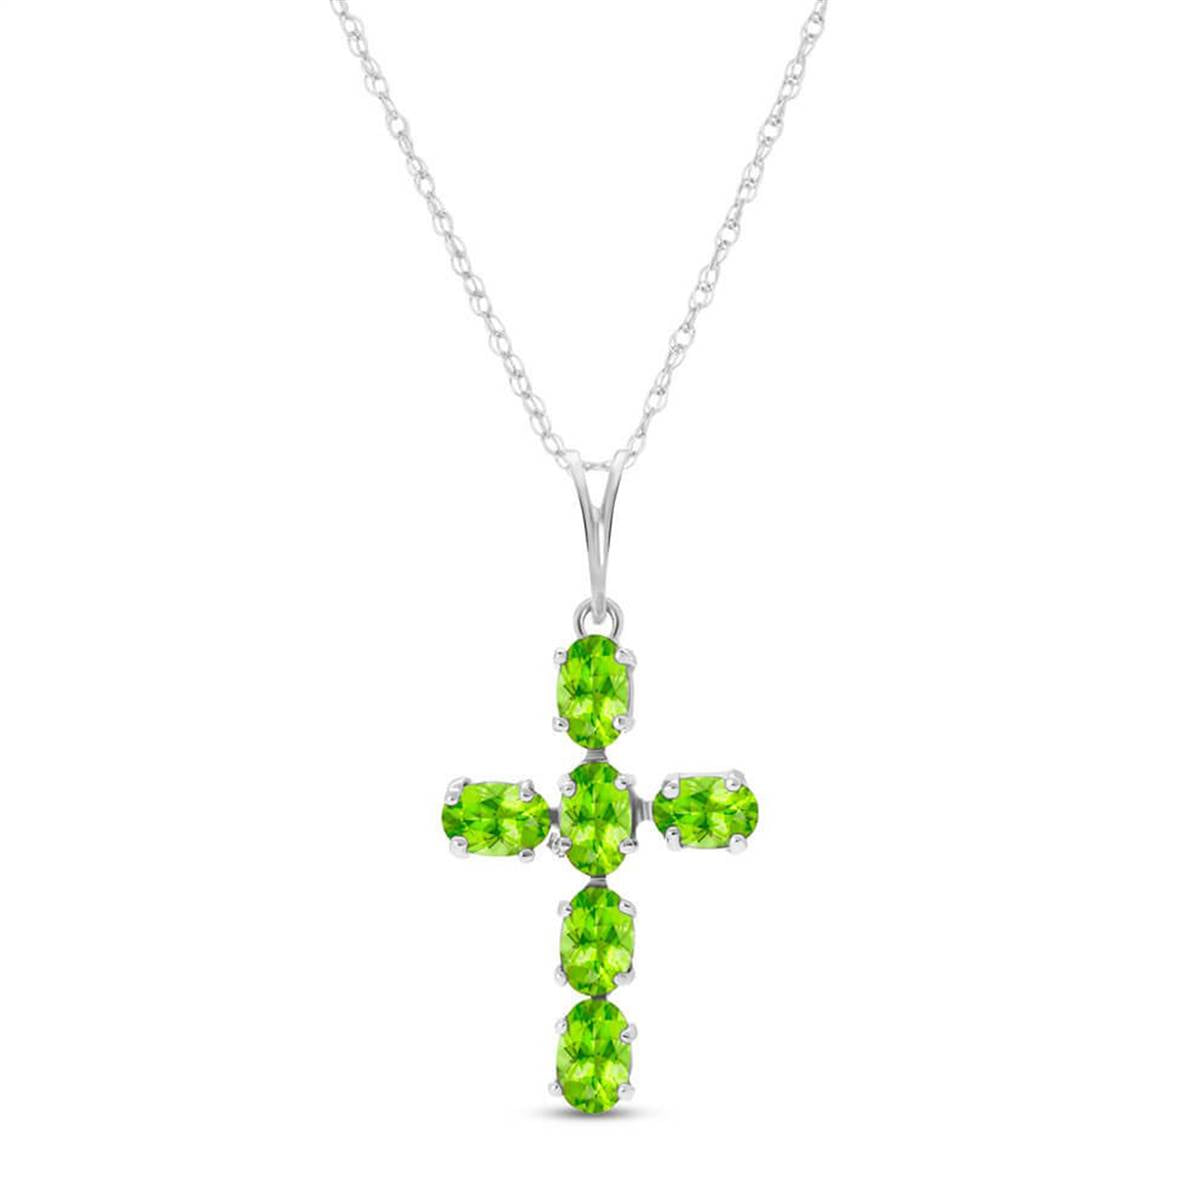 1.5 Carat 14K Solid White Gold Cross Necklace Natural Peridot